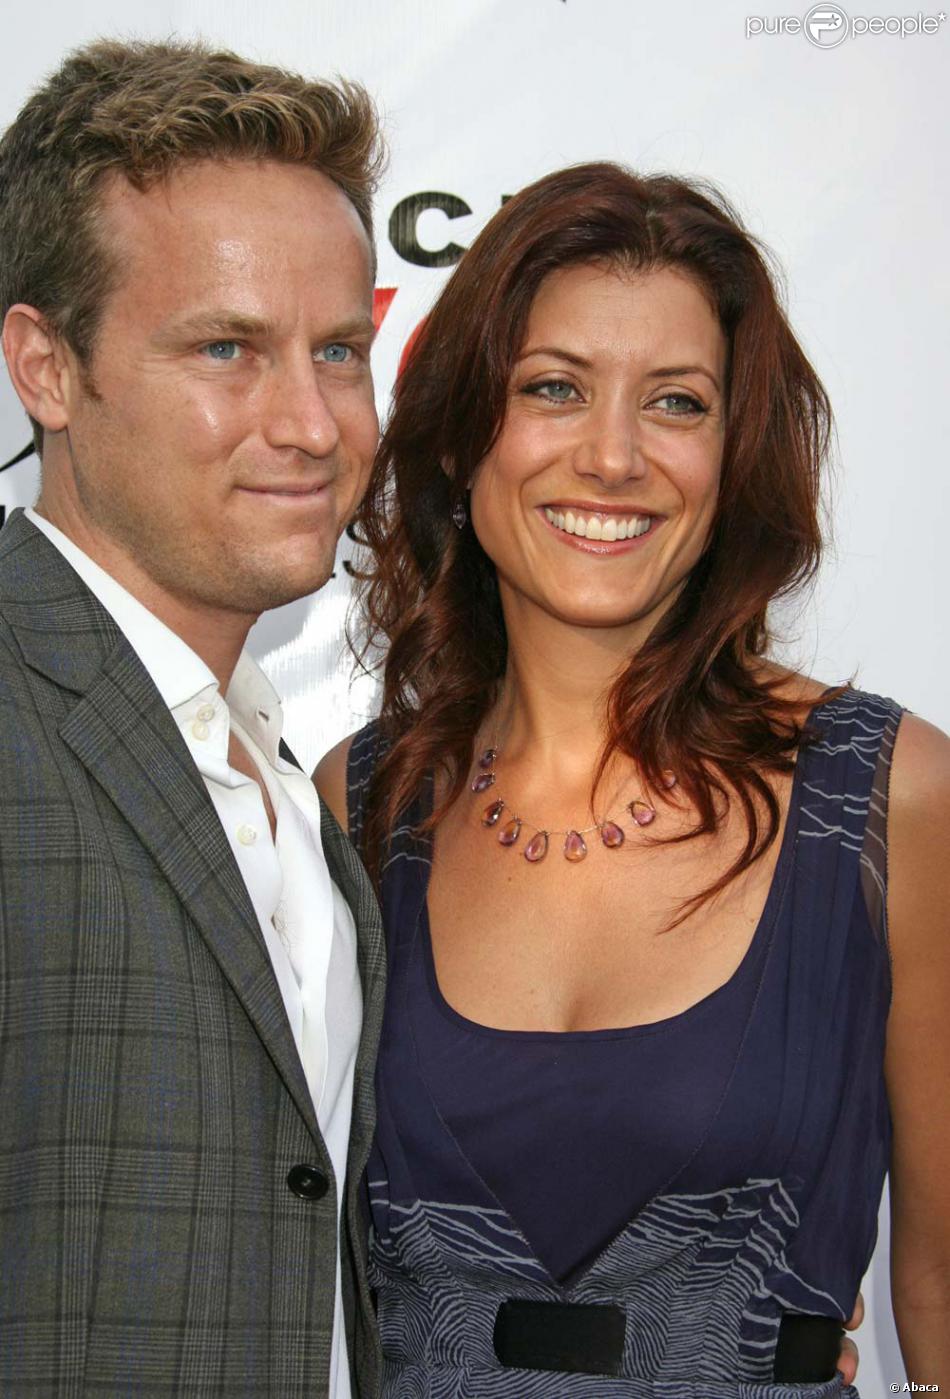 rynker prop anbefale Kate Walsh et Alex Young, le 19 juillet 2008 ! - Purepeople